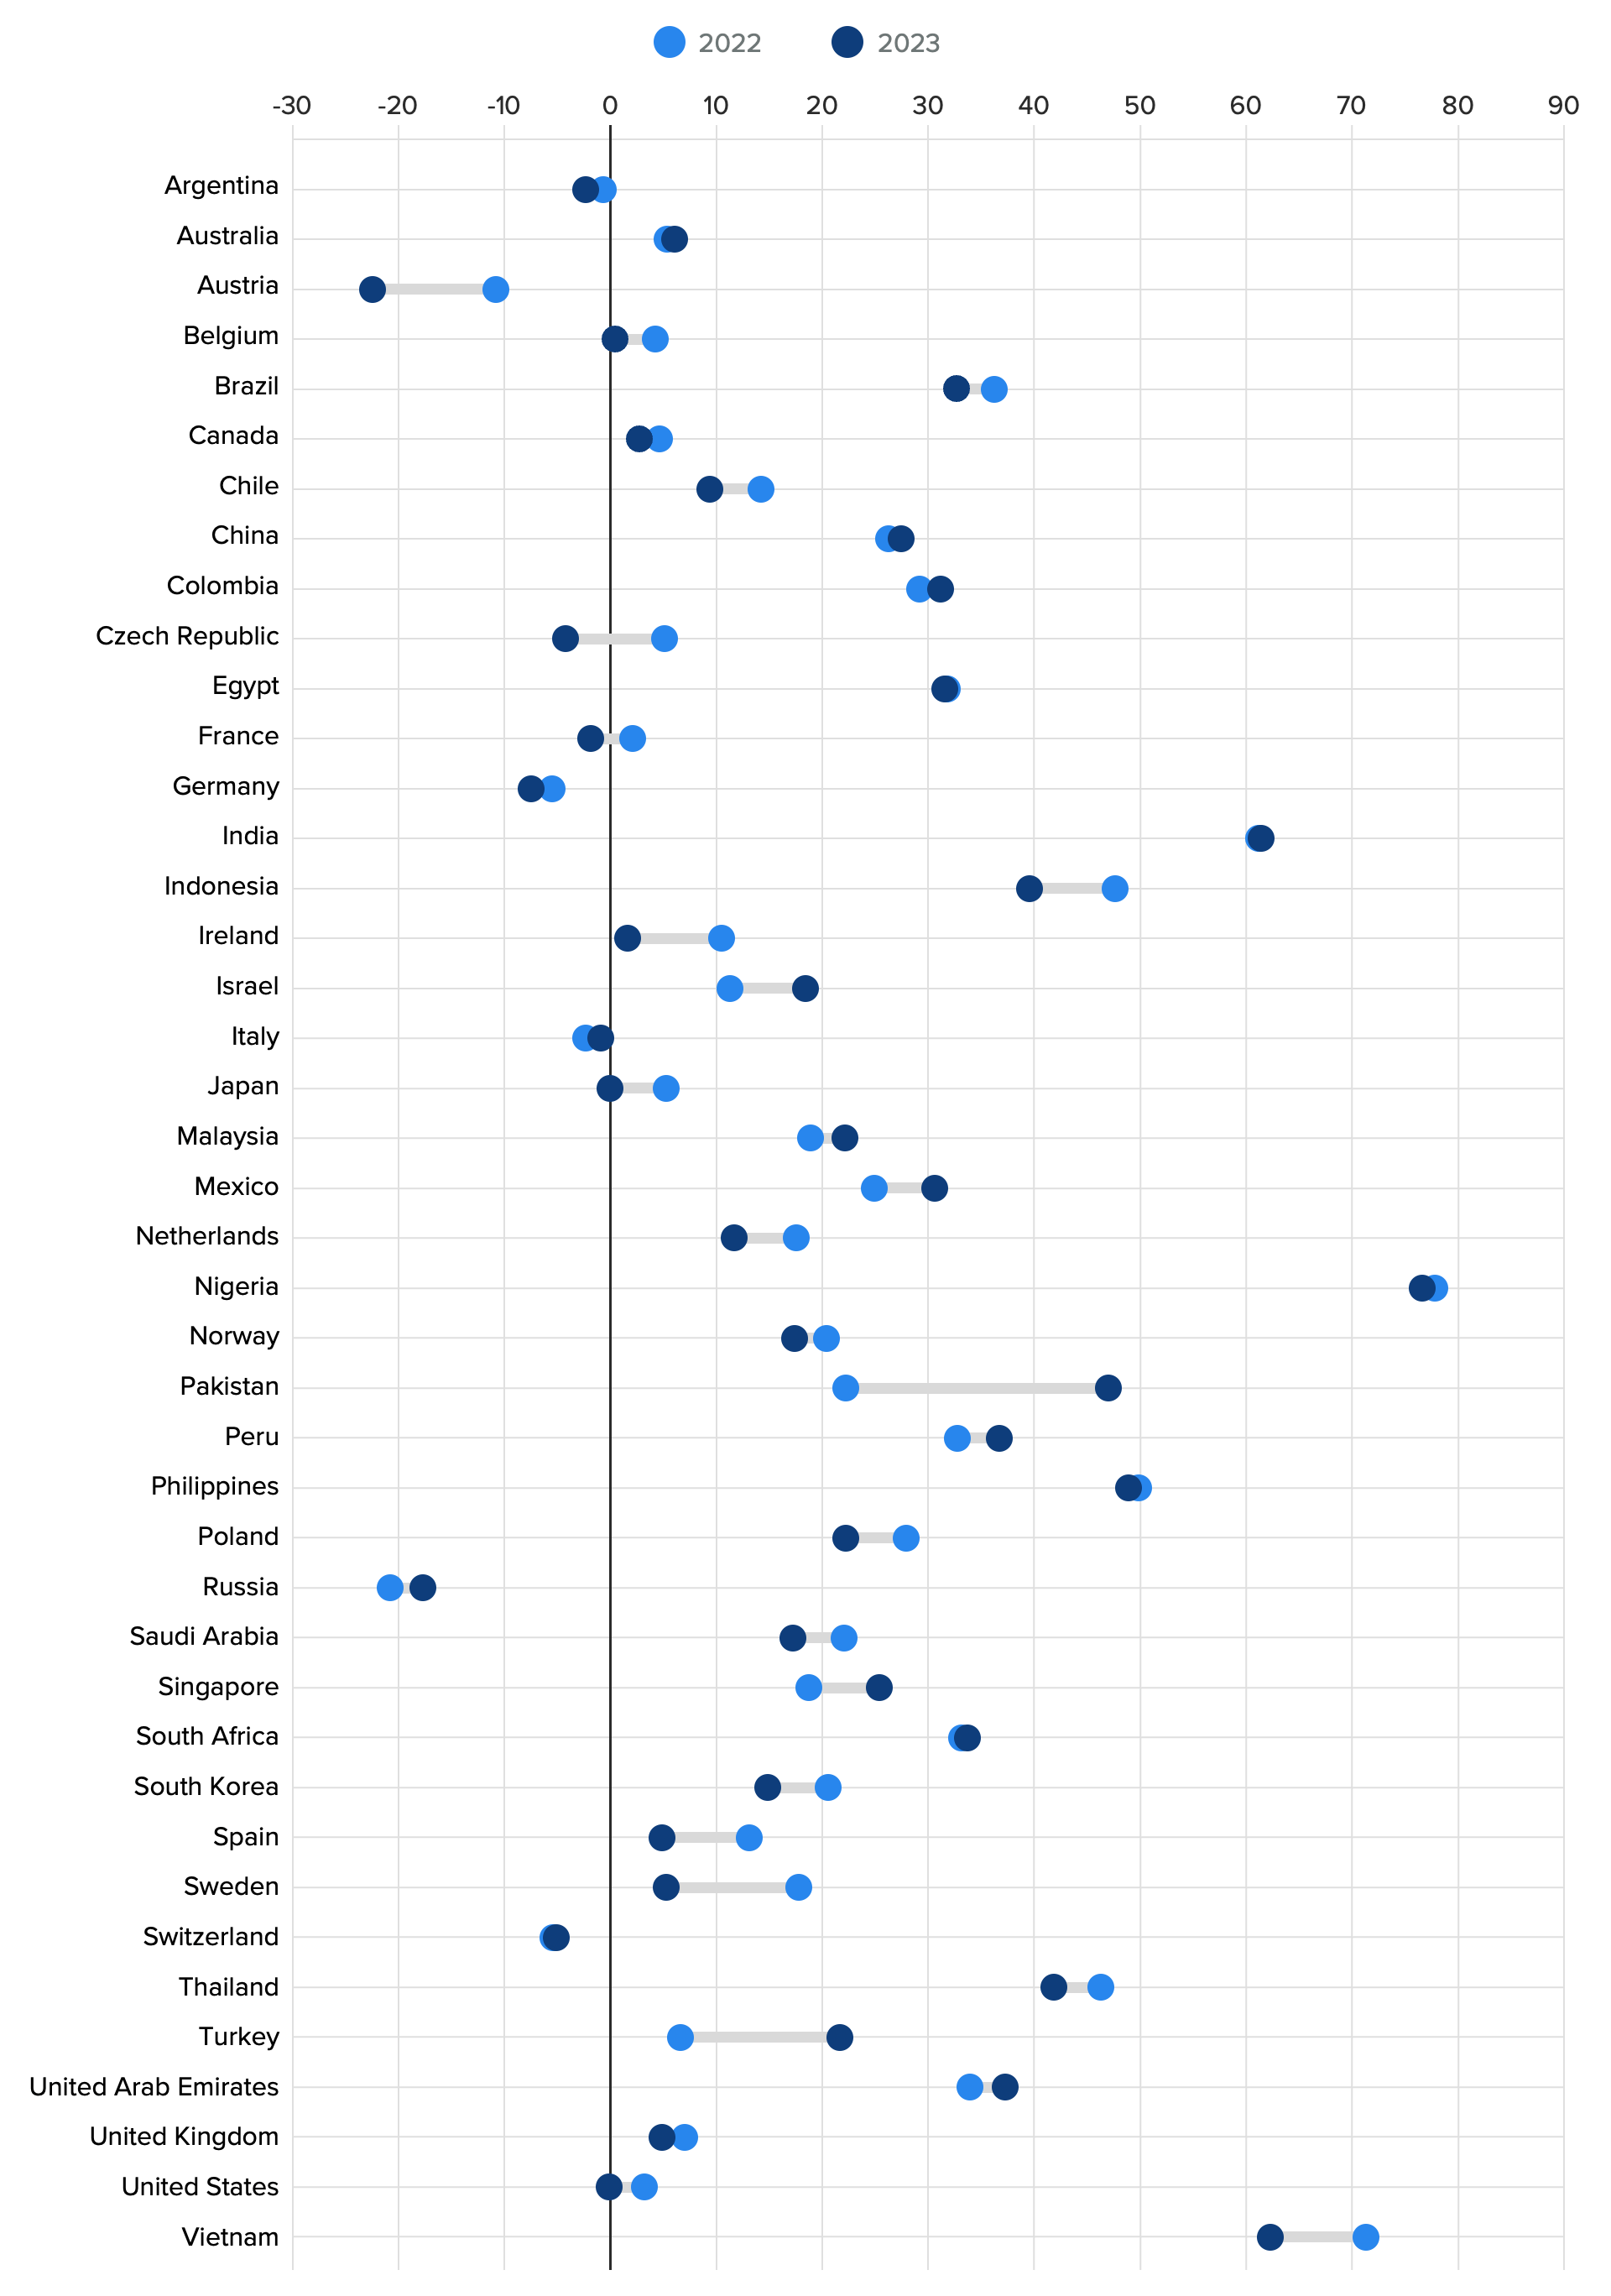 Dumbbell chart showing net favorability of the World Bank in 2022 versus 2023 in select countries